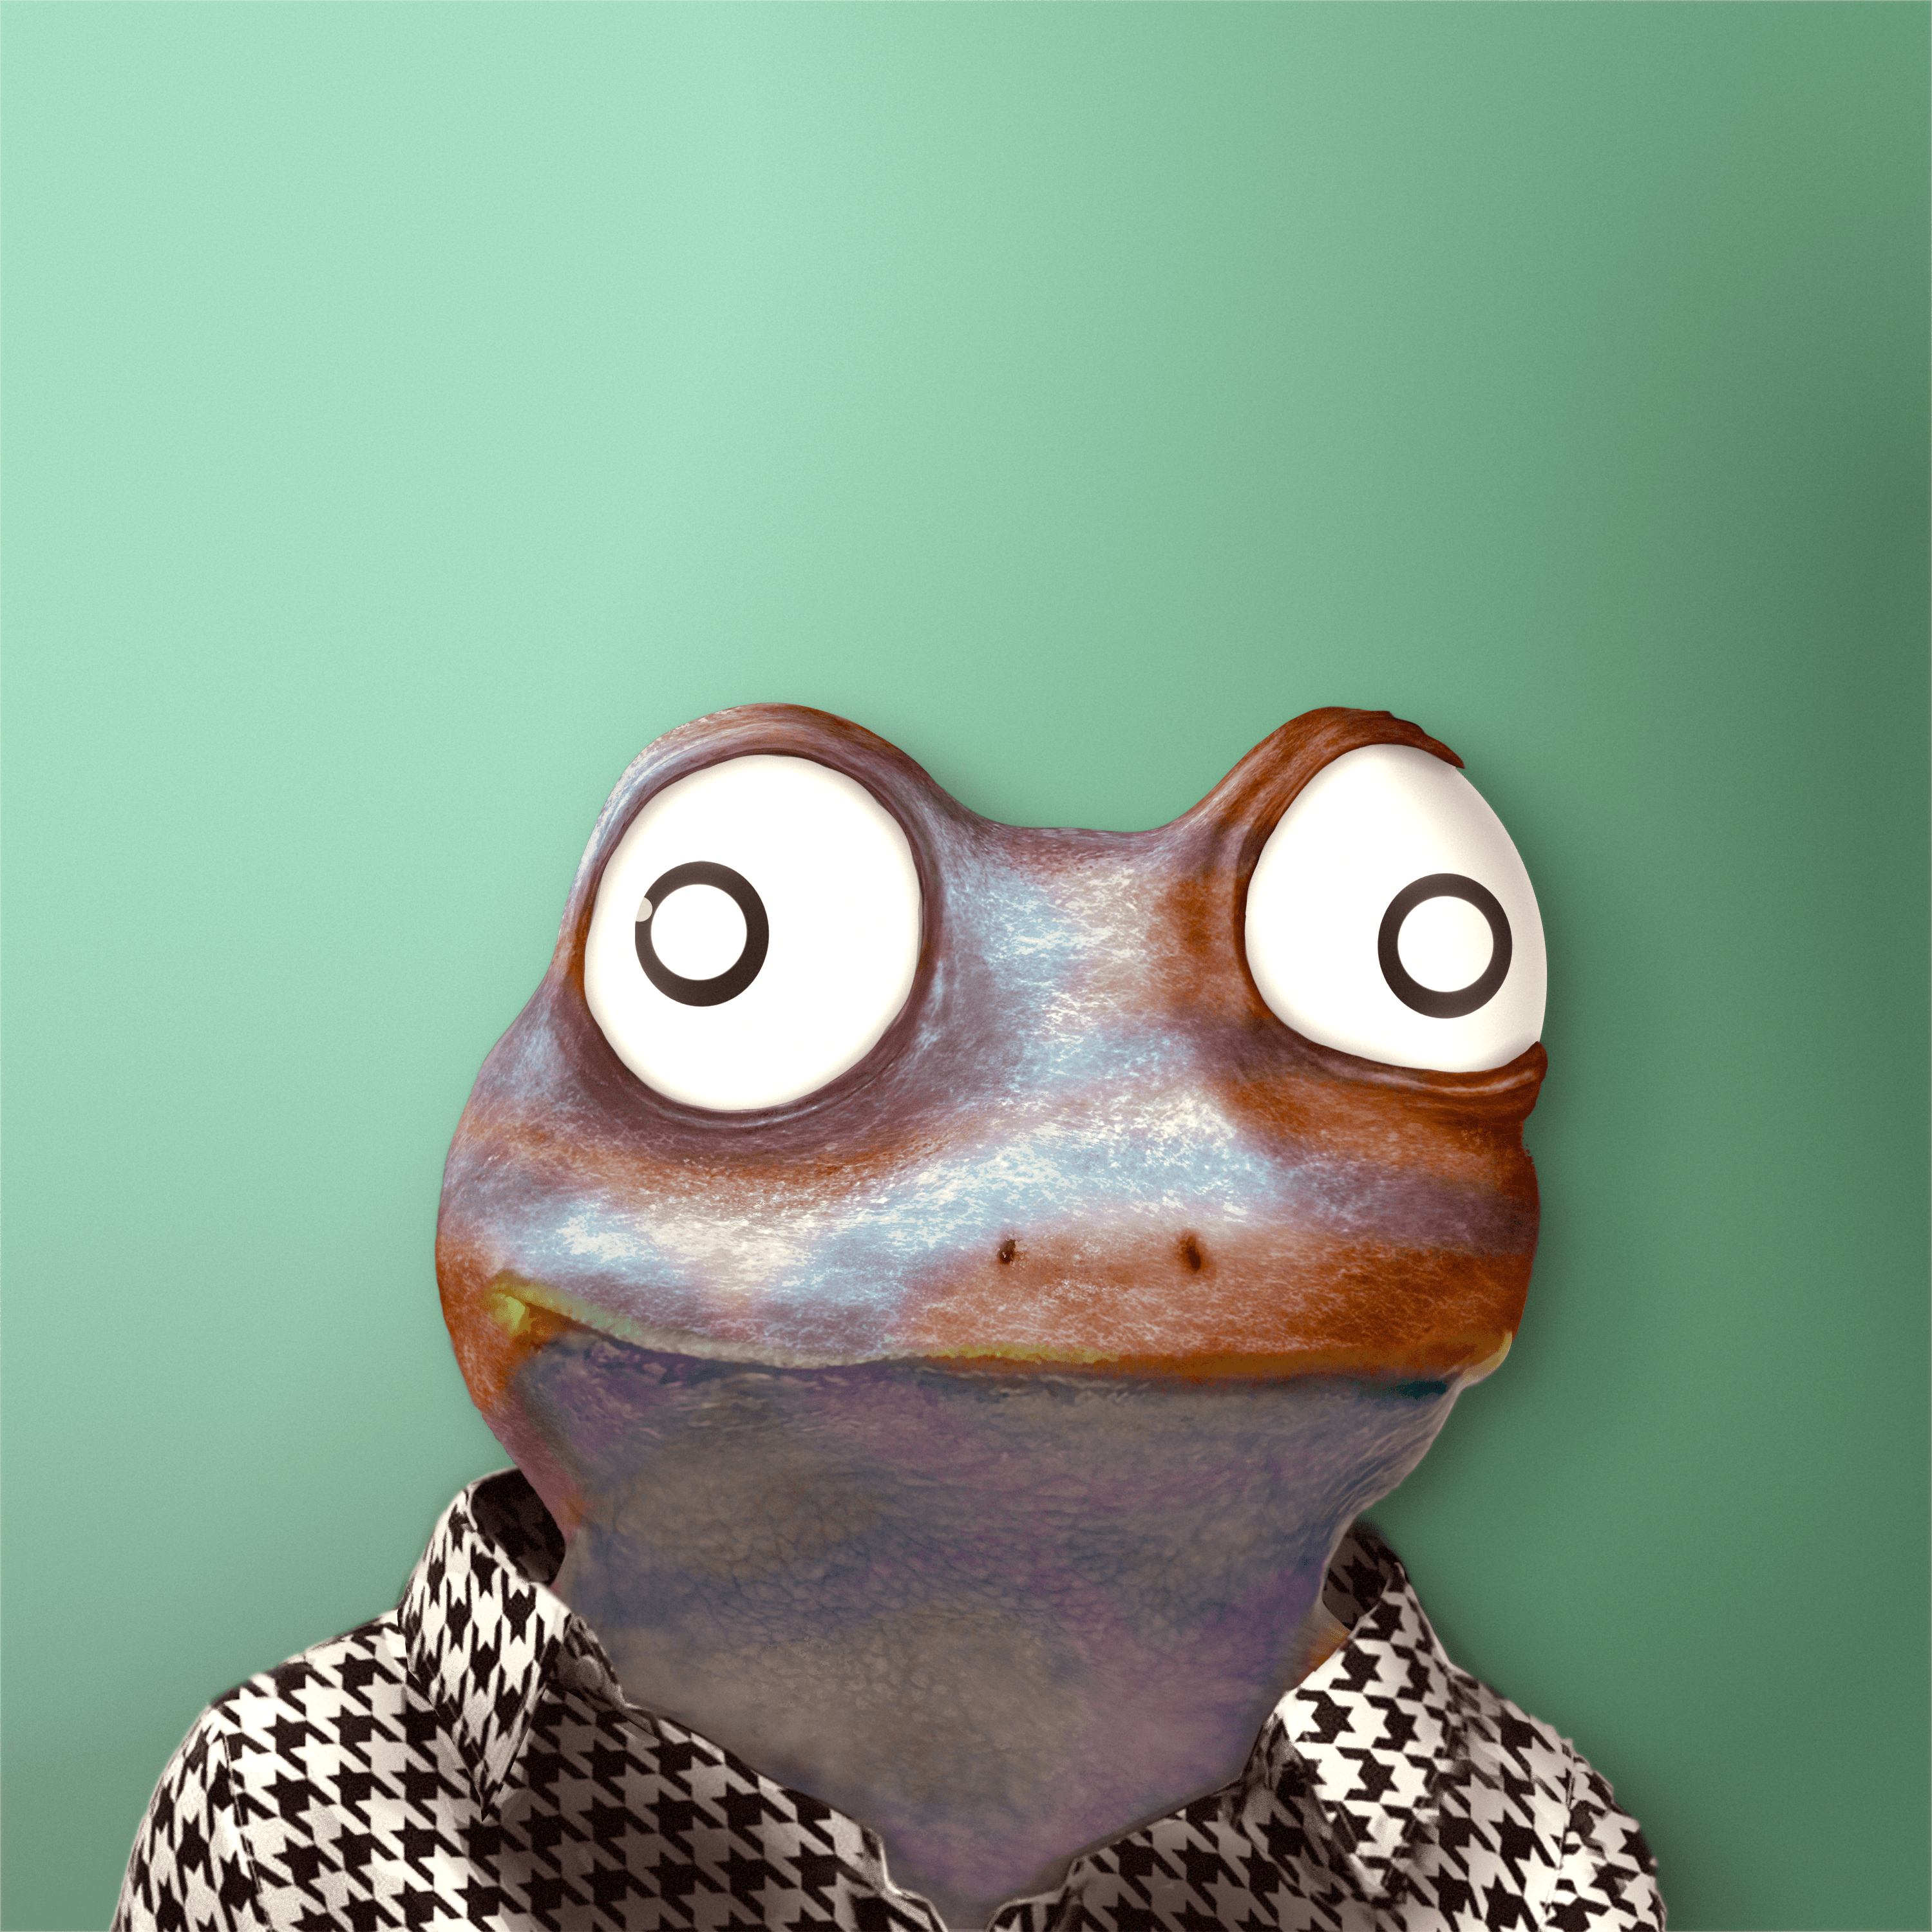 Notorious Frog #7377